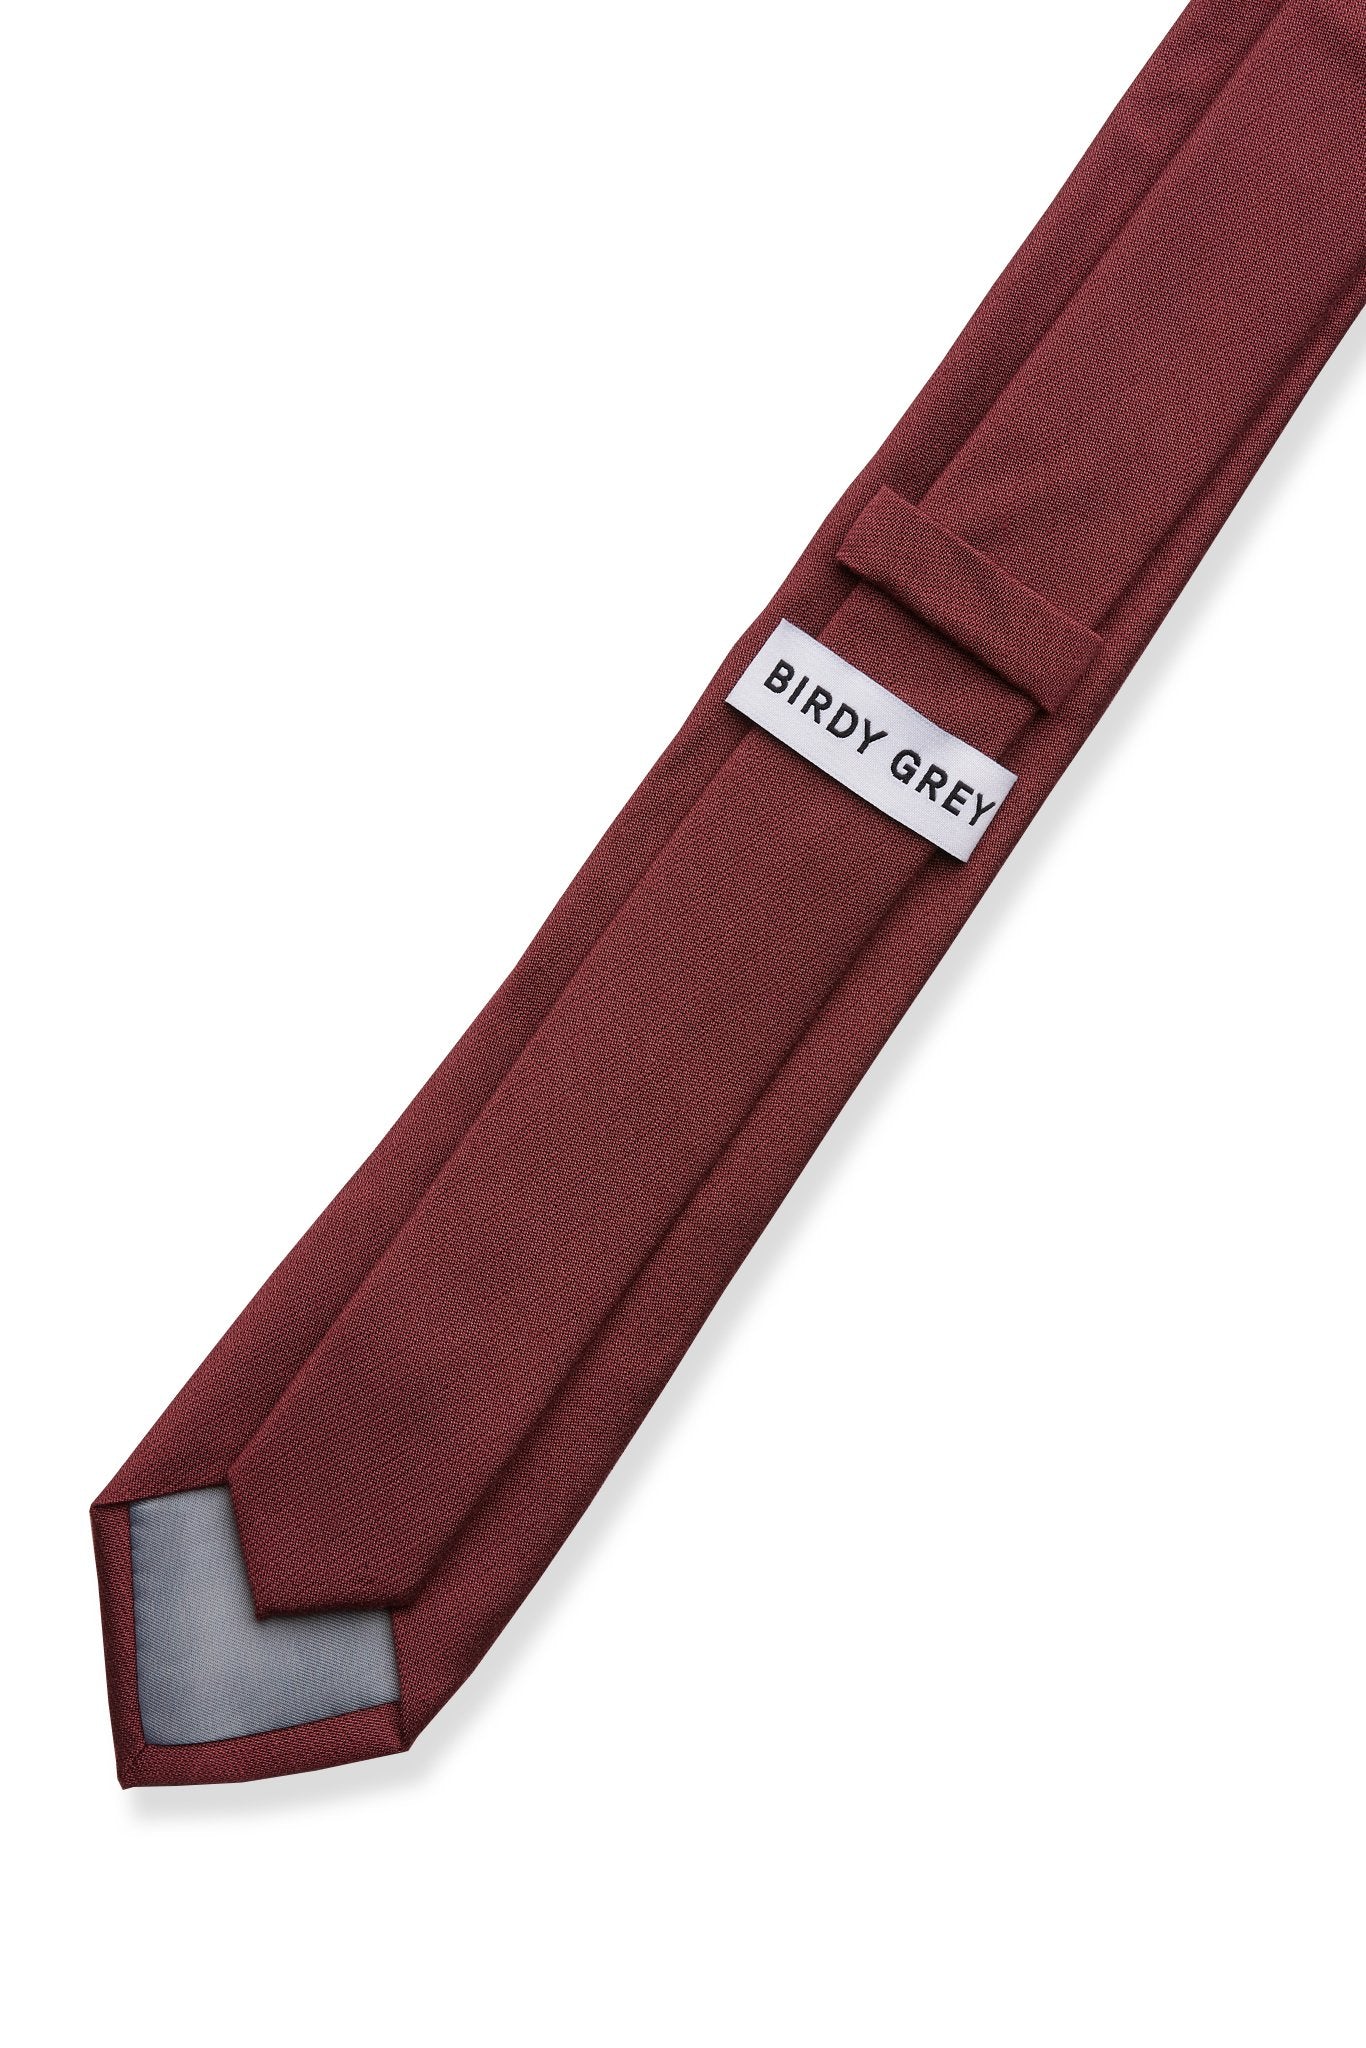 Simon Necktie in Rosewood by Birdy Grey, back view